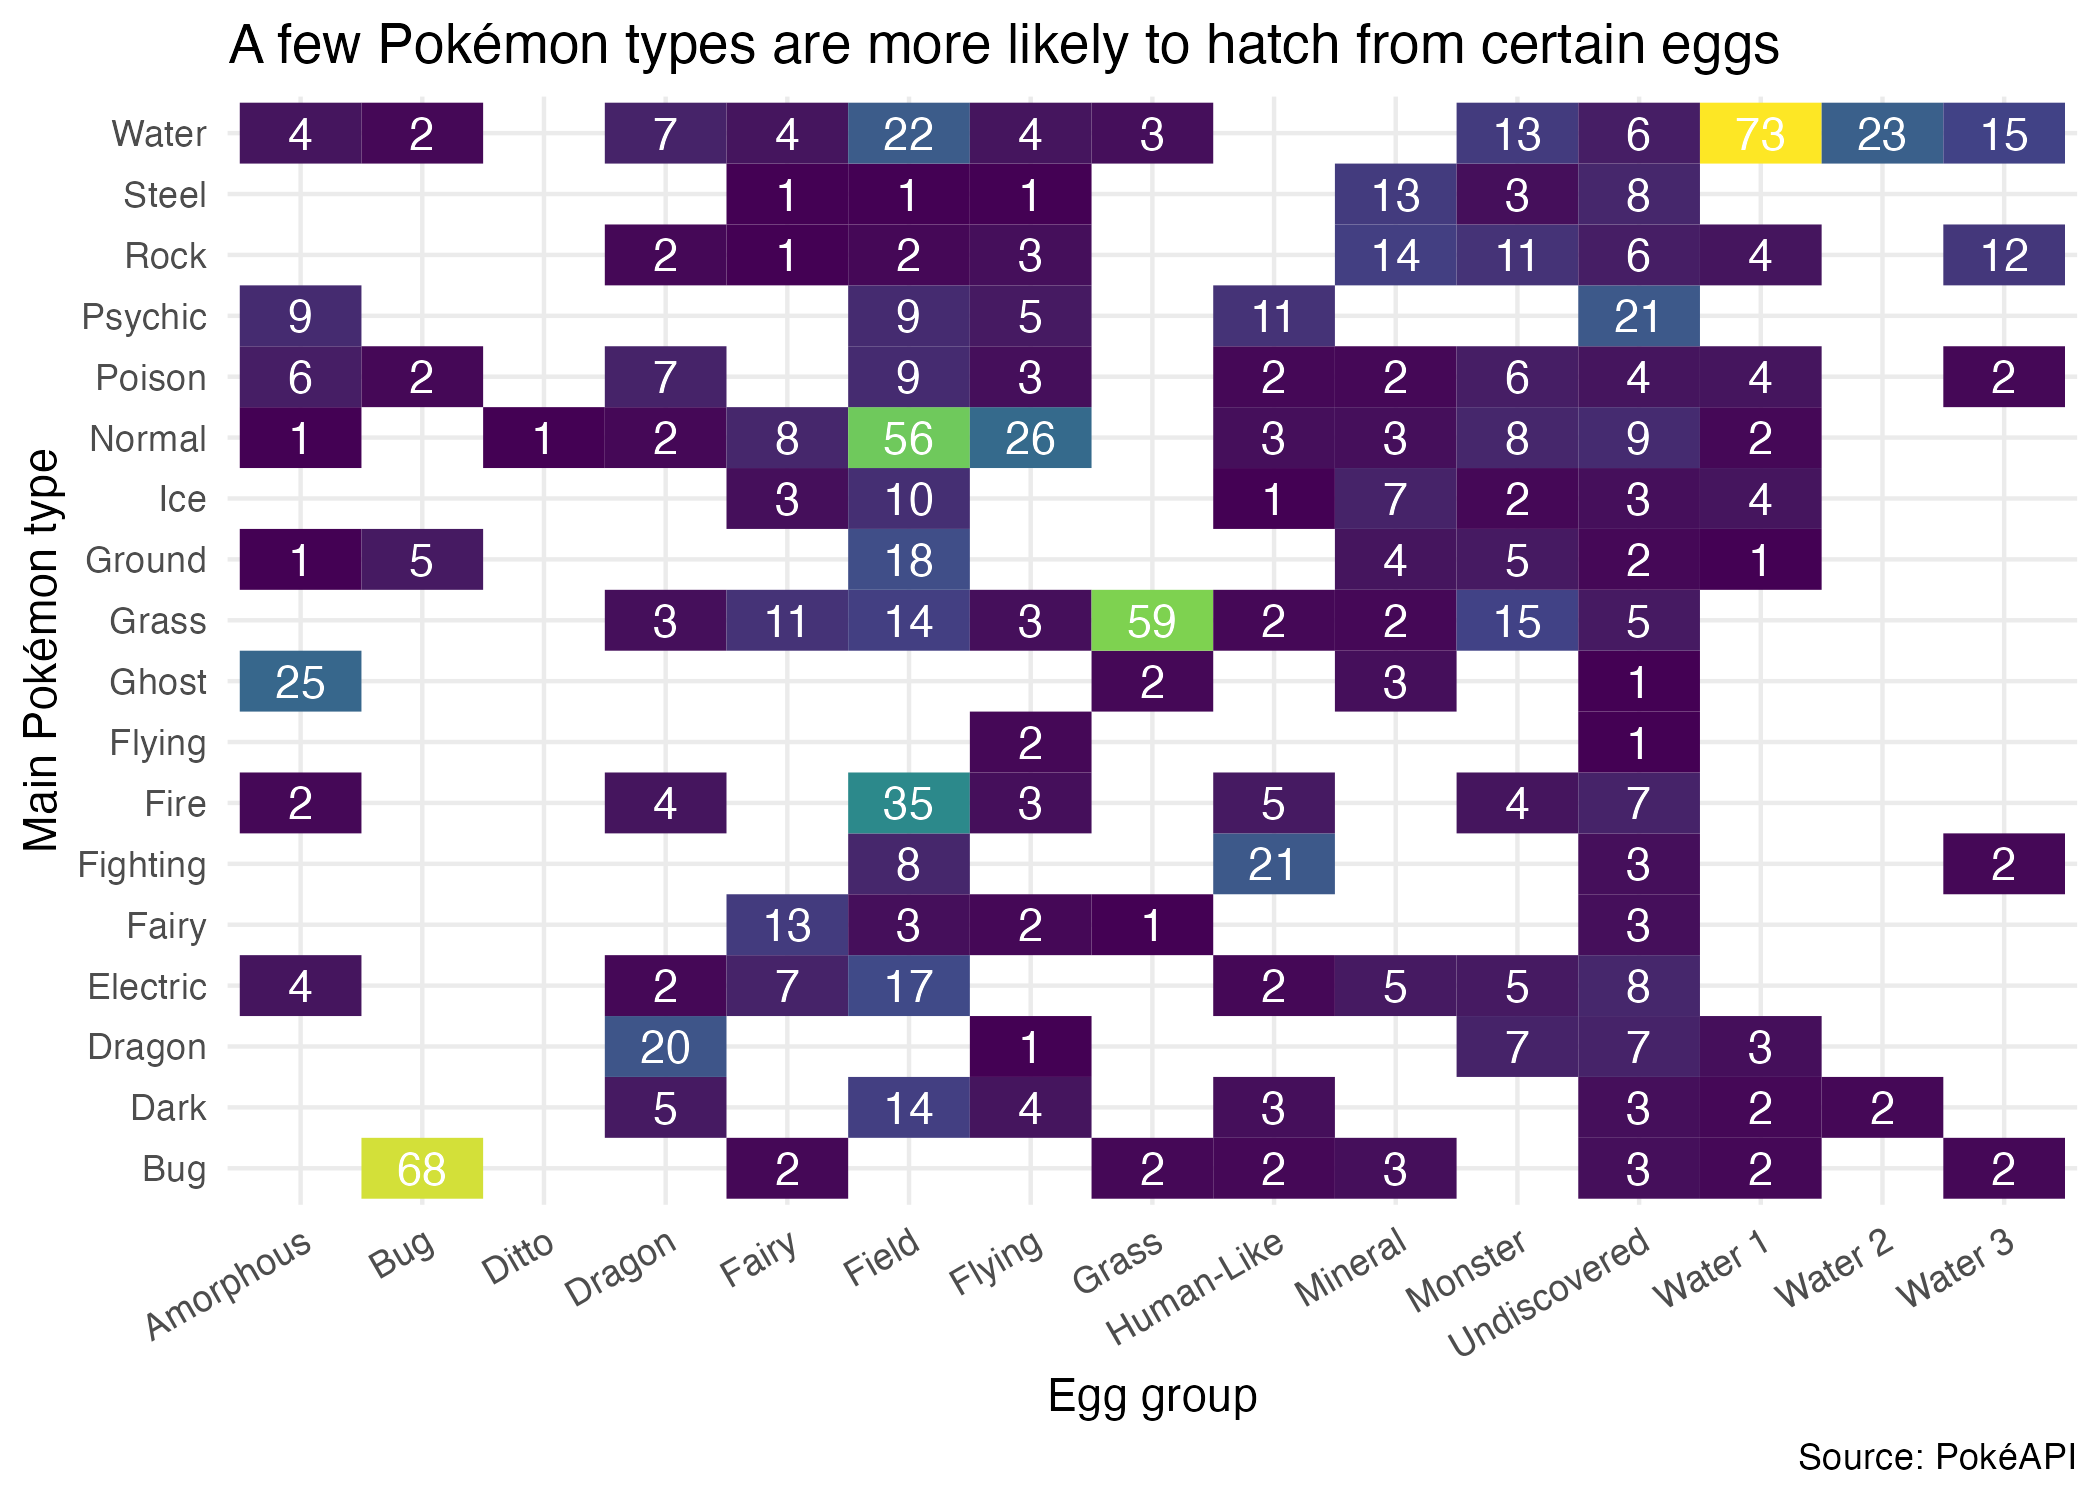 A heatmap showing the distribution of egg groups for each primary type.